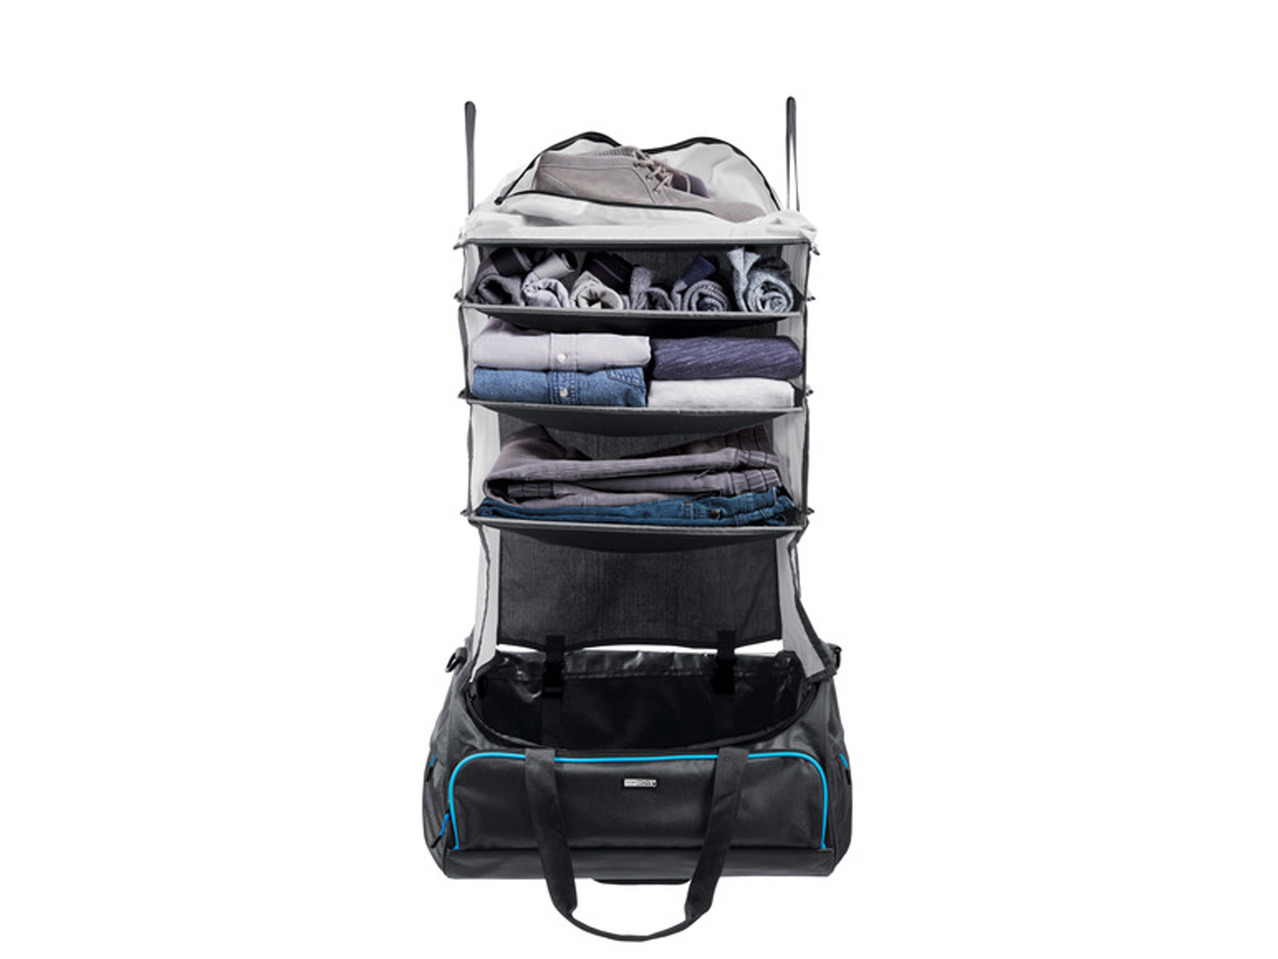 43L Travel Bag with Build in Organiser